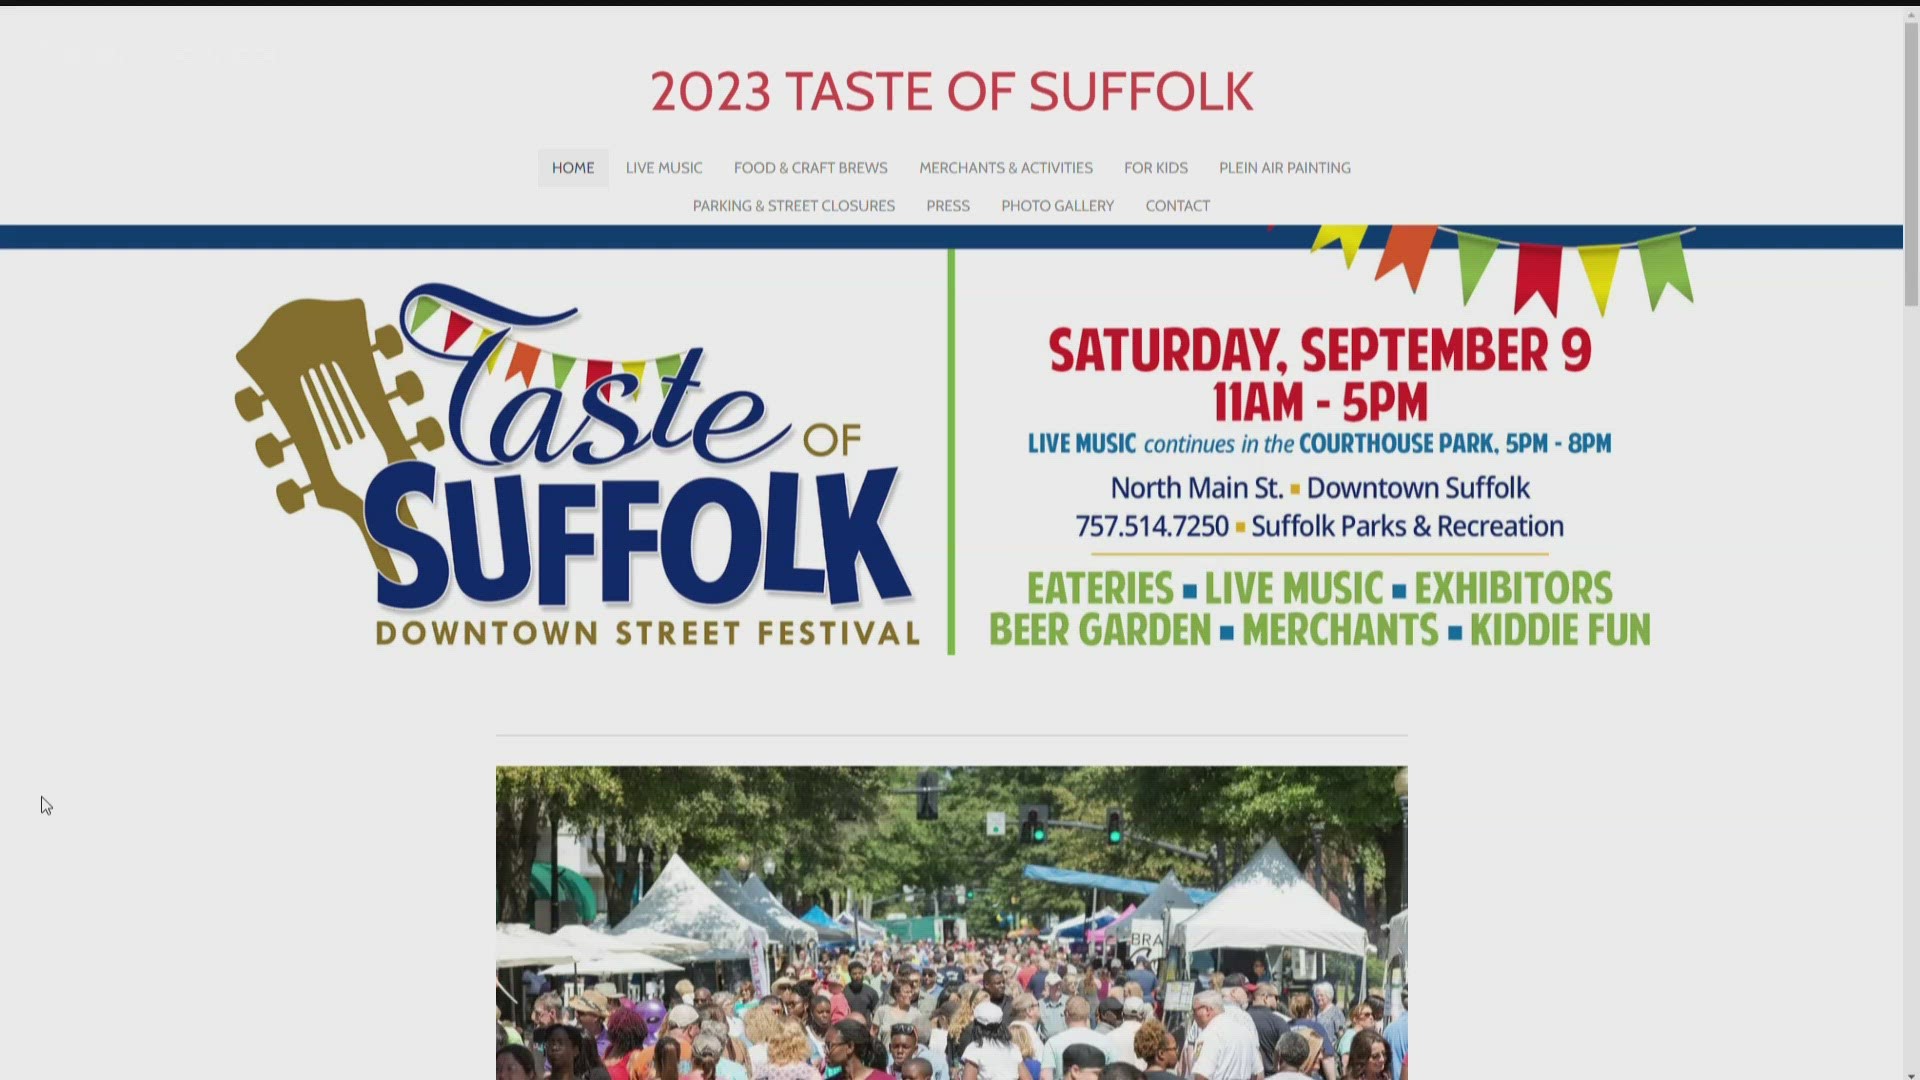 The "Taste of Suffolk" returns for its 17th year in downtown Suffolk next weekend.